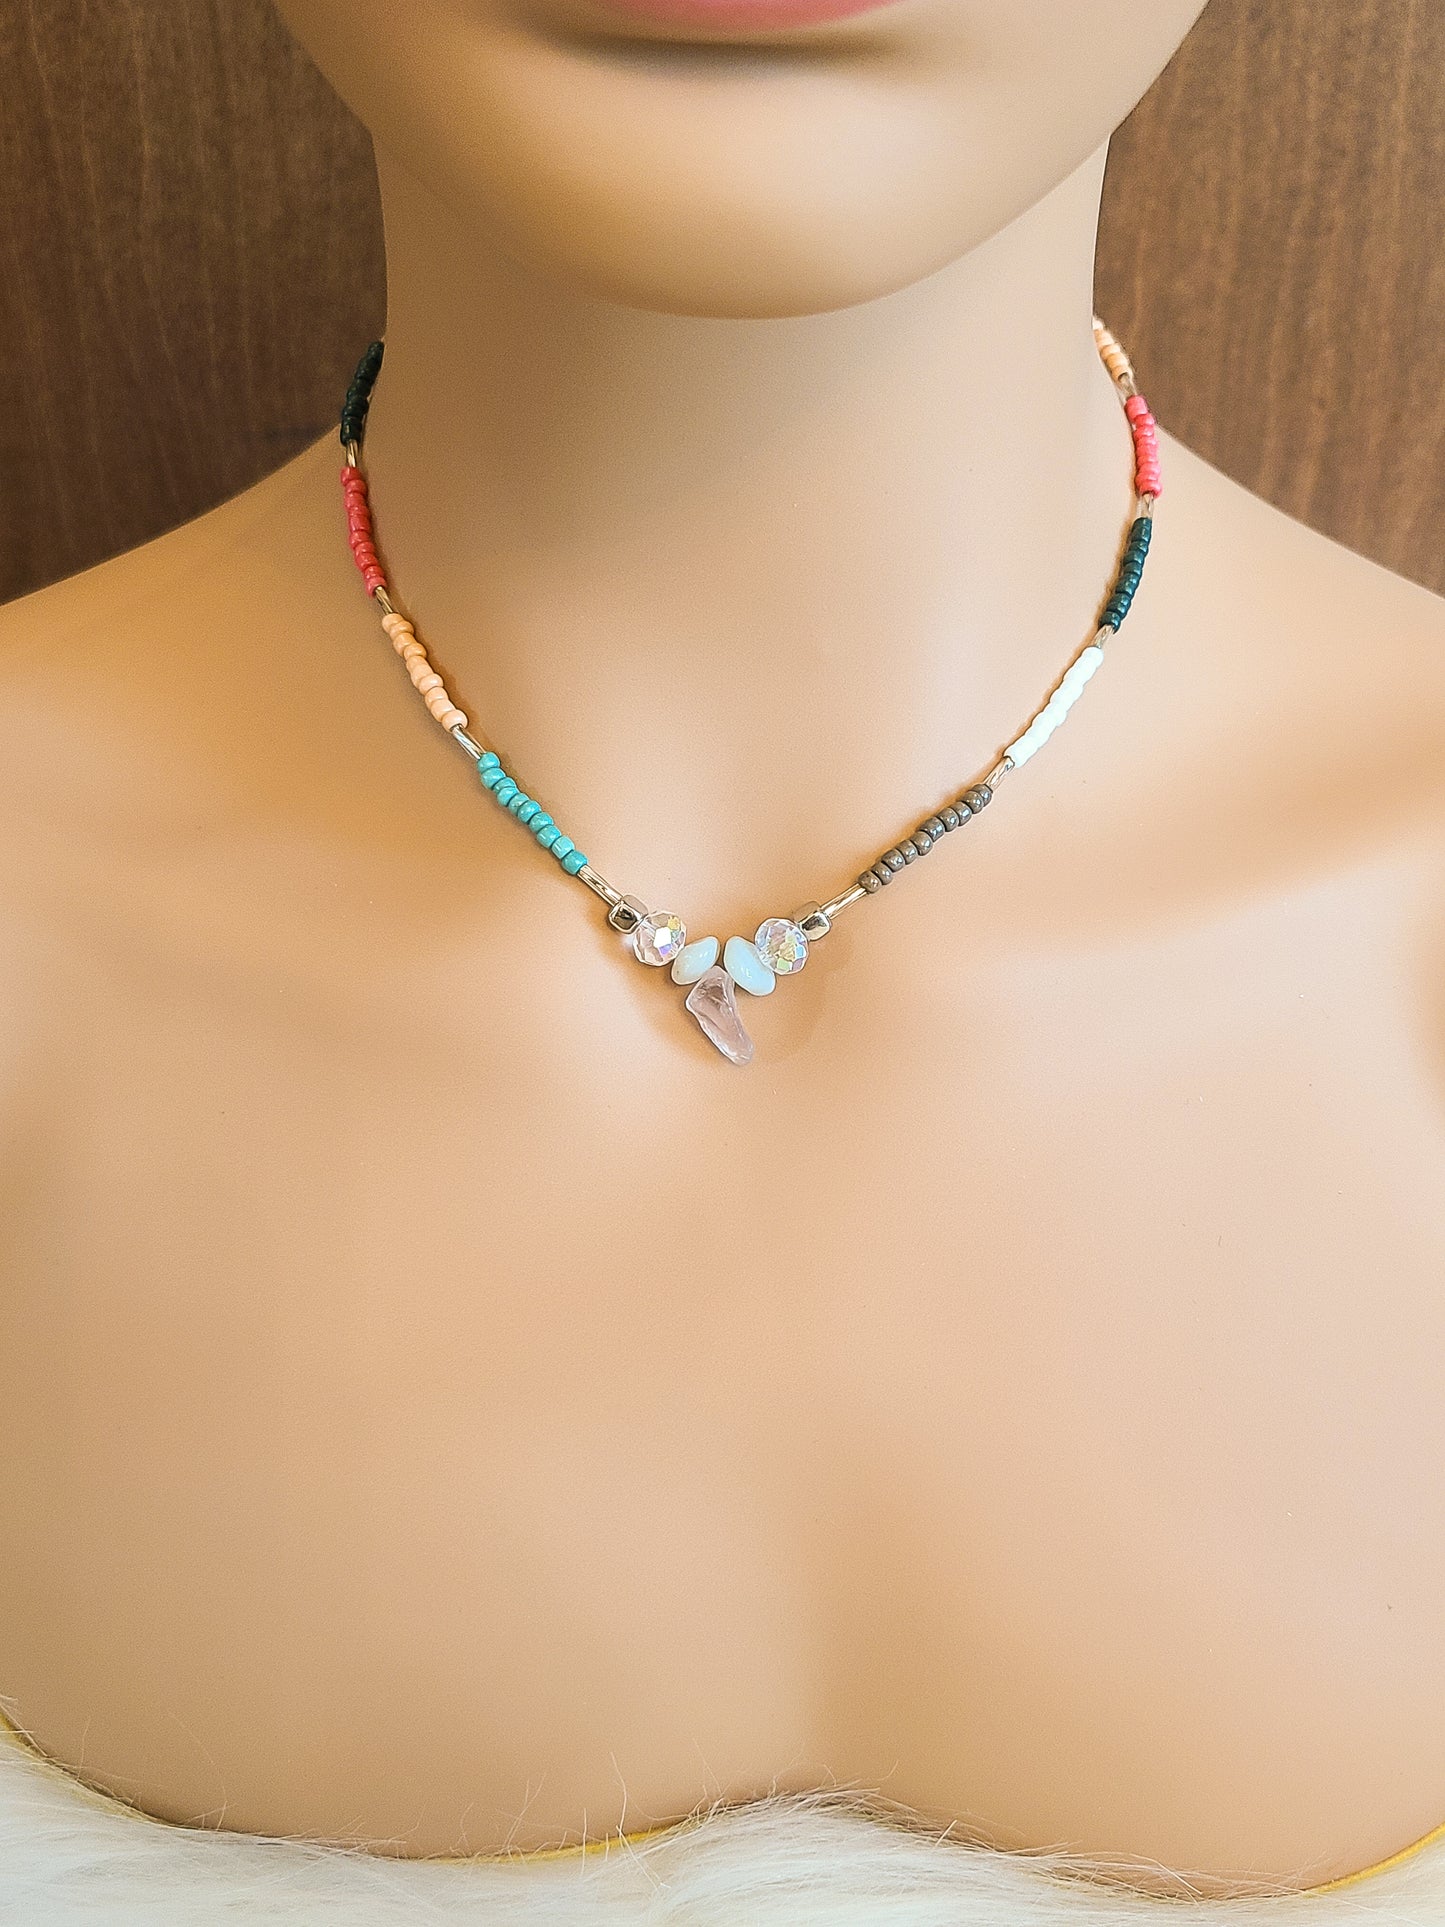 Geometric Natural Stone Seed Bead Necklace